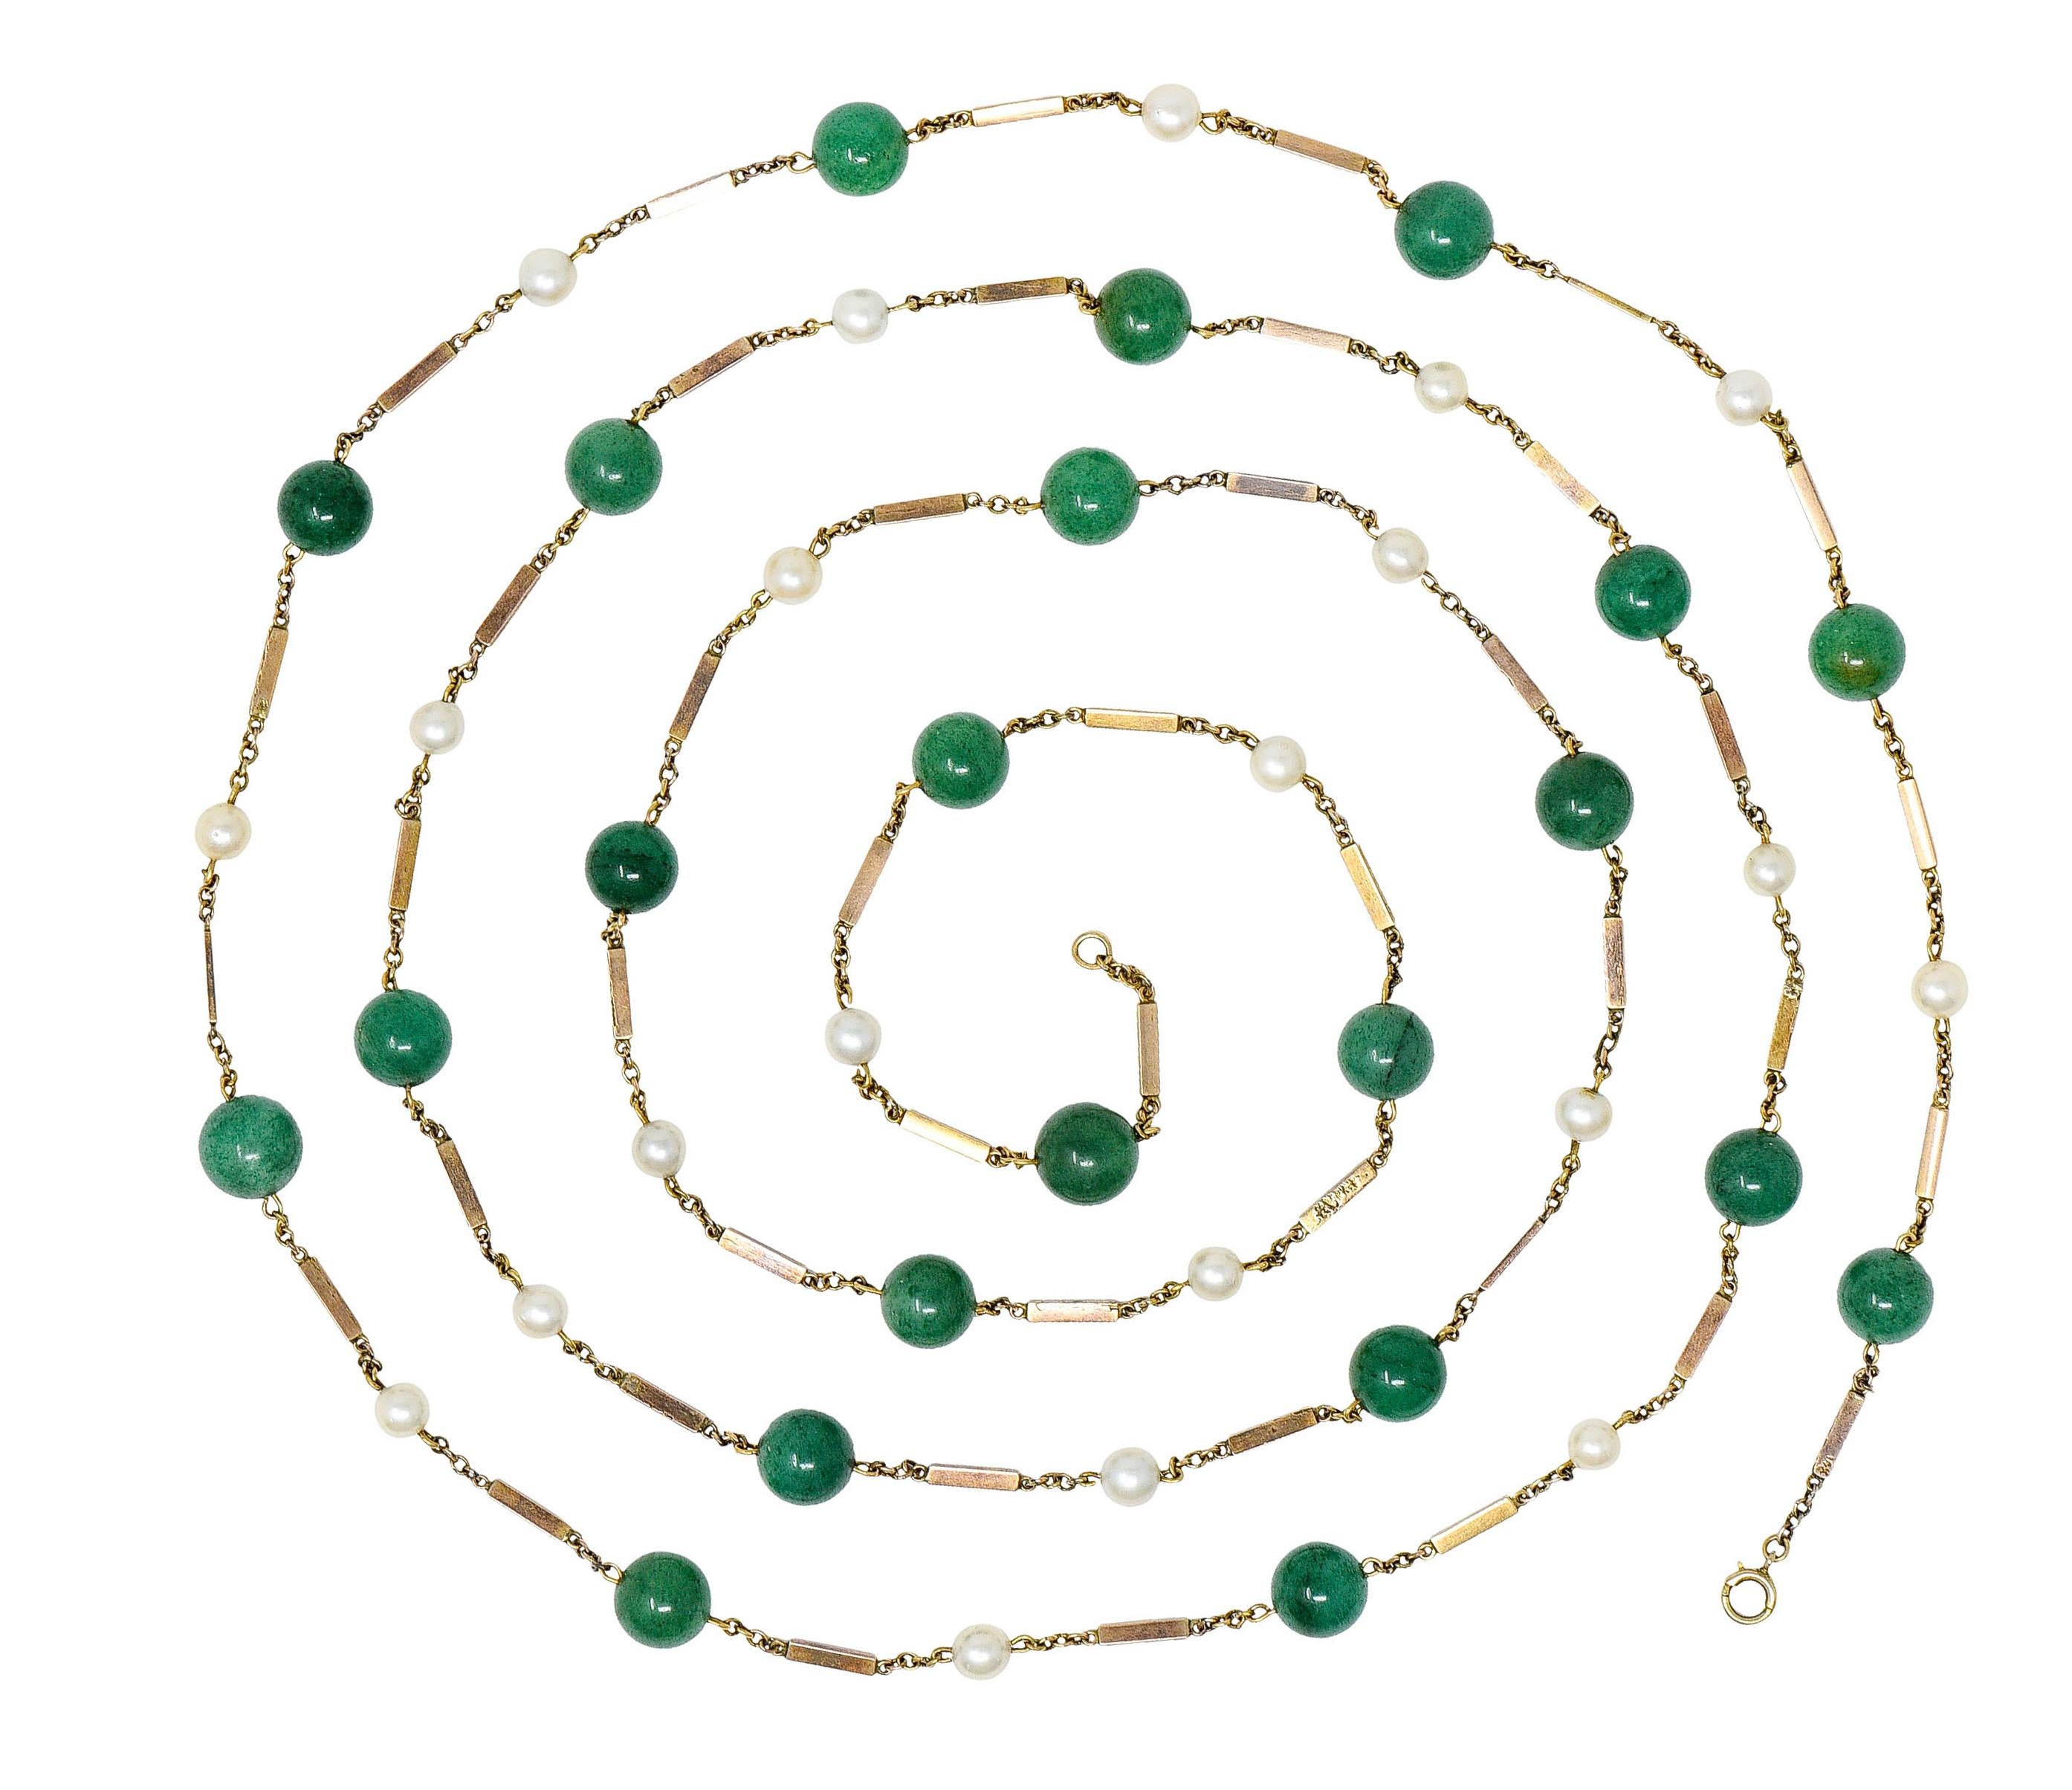 Long chain necklace is intermittent with pearl, aventurine, and bar stations

Pearls are approximately 6.0 mm with well matched cream body color and good to very good luster

Aventurine are approximately 10.0 mm and very well matched with mild to